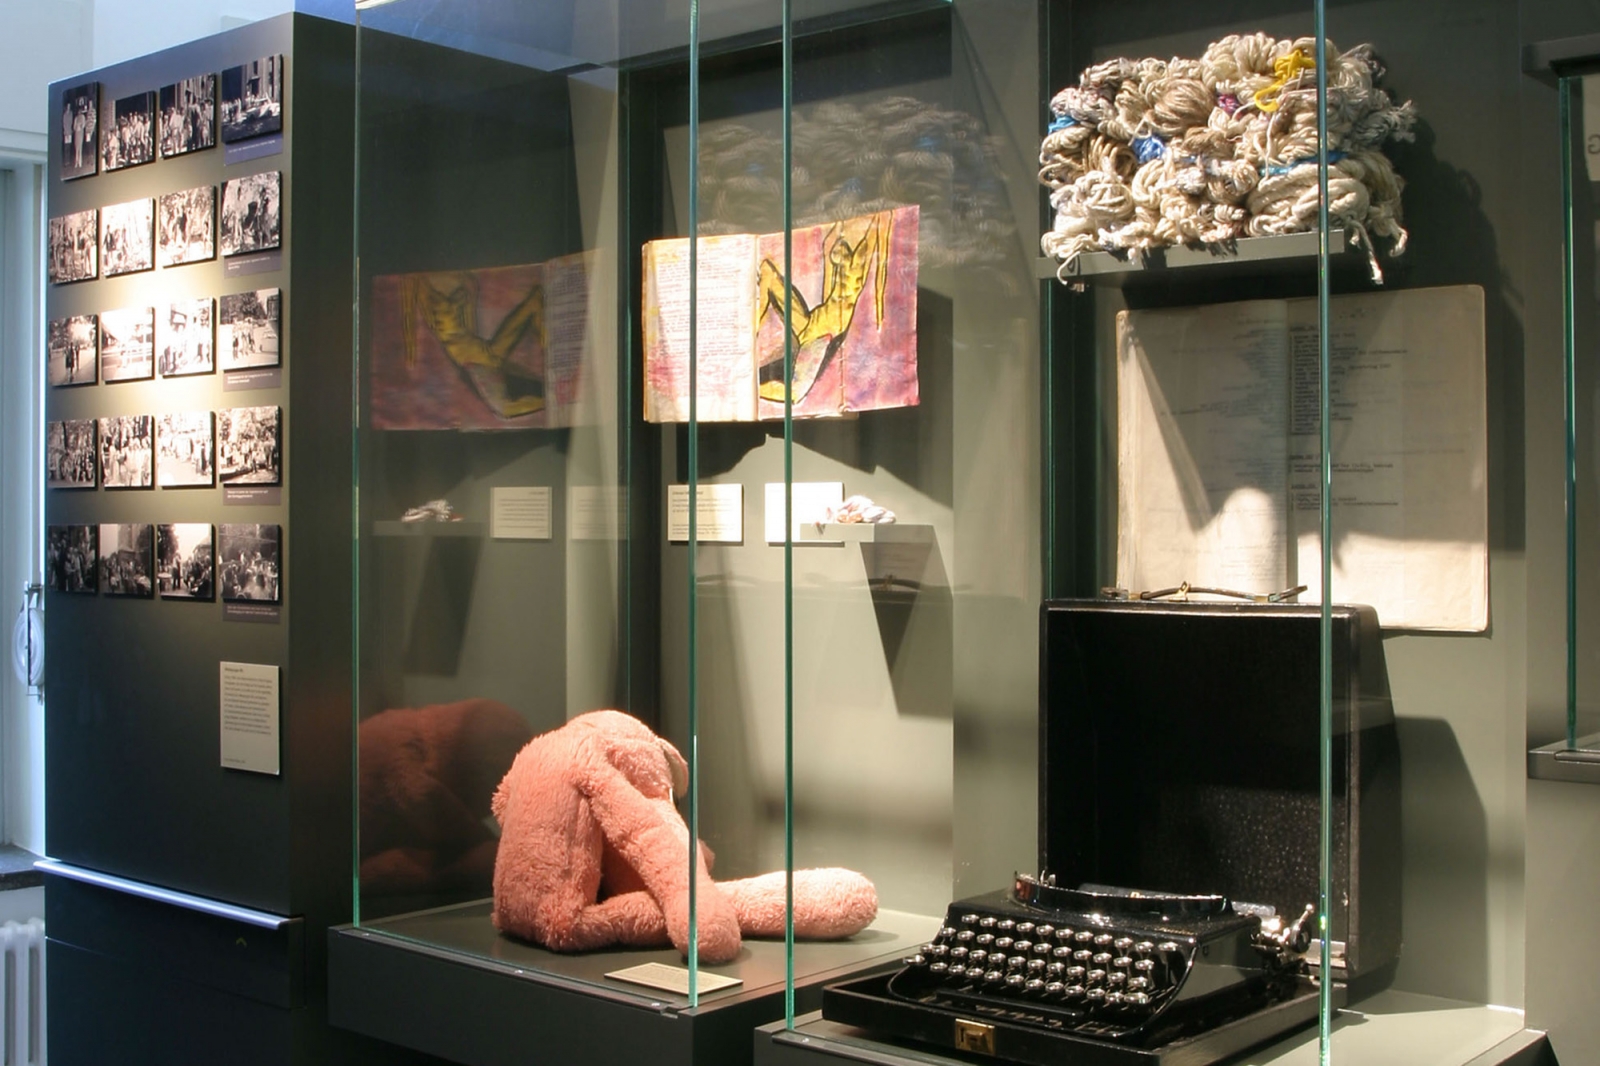 Objects in the exhibition